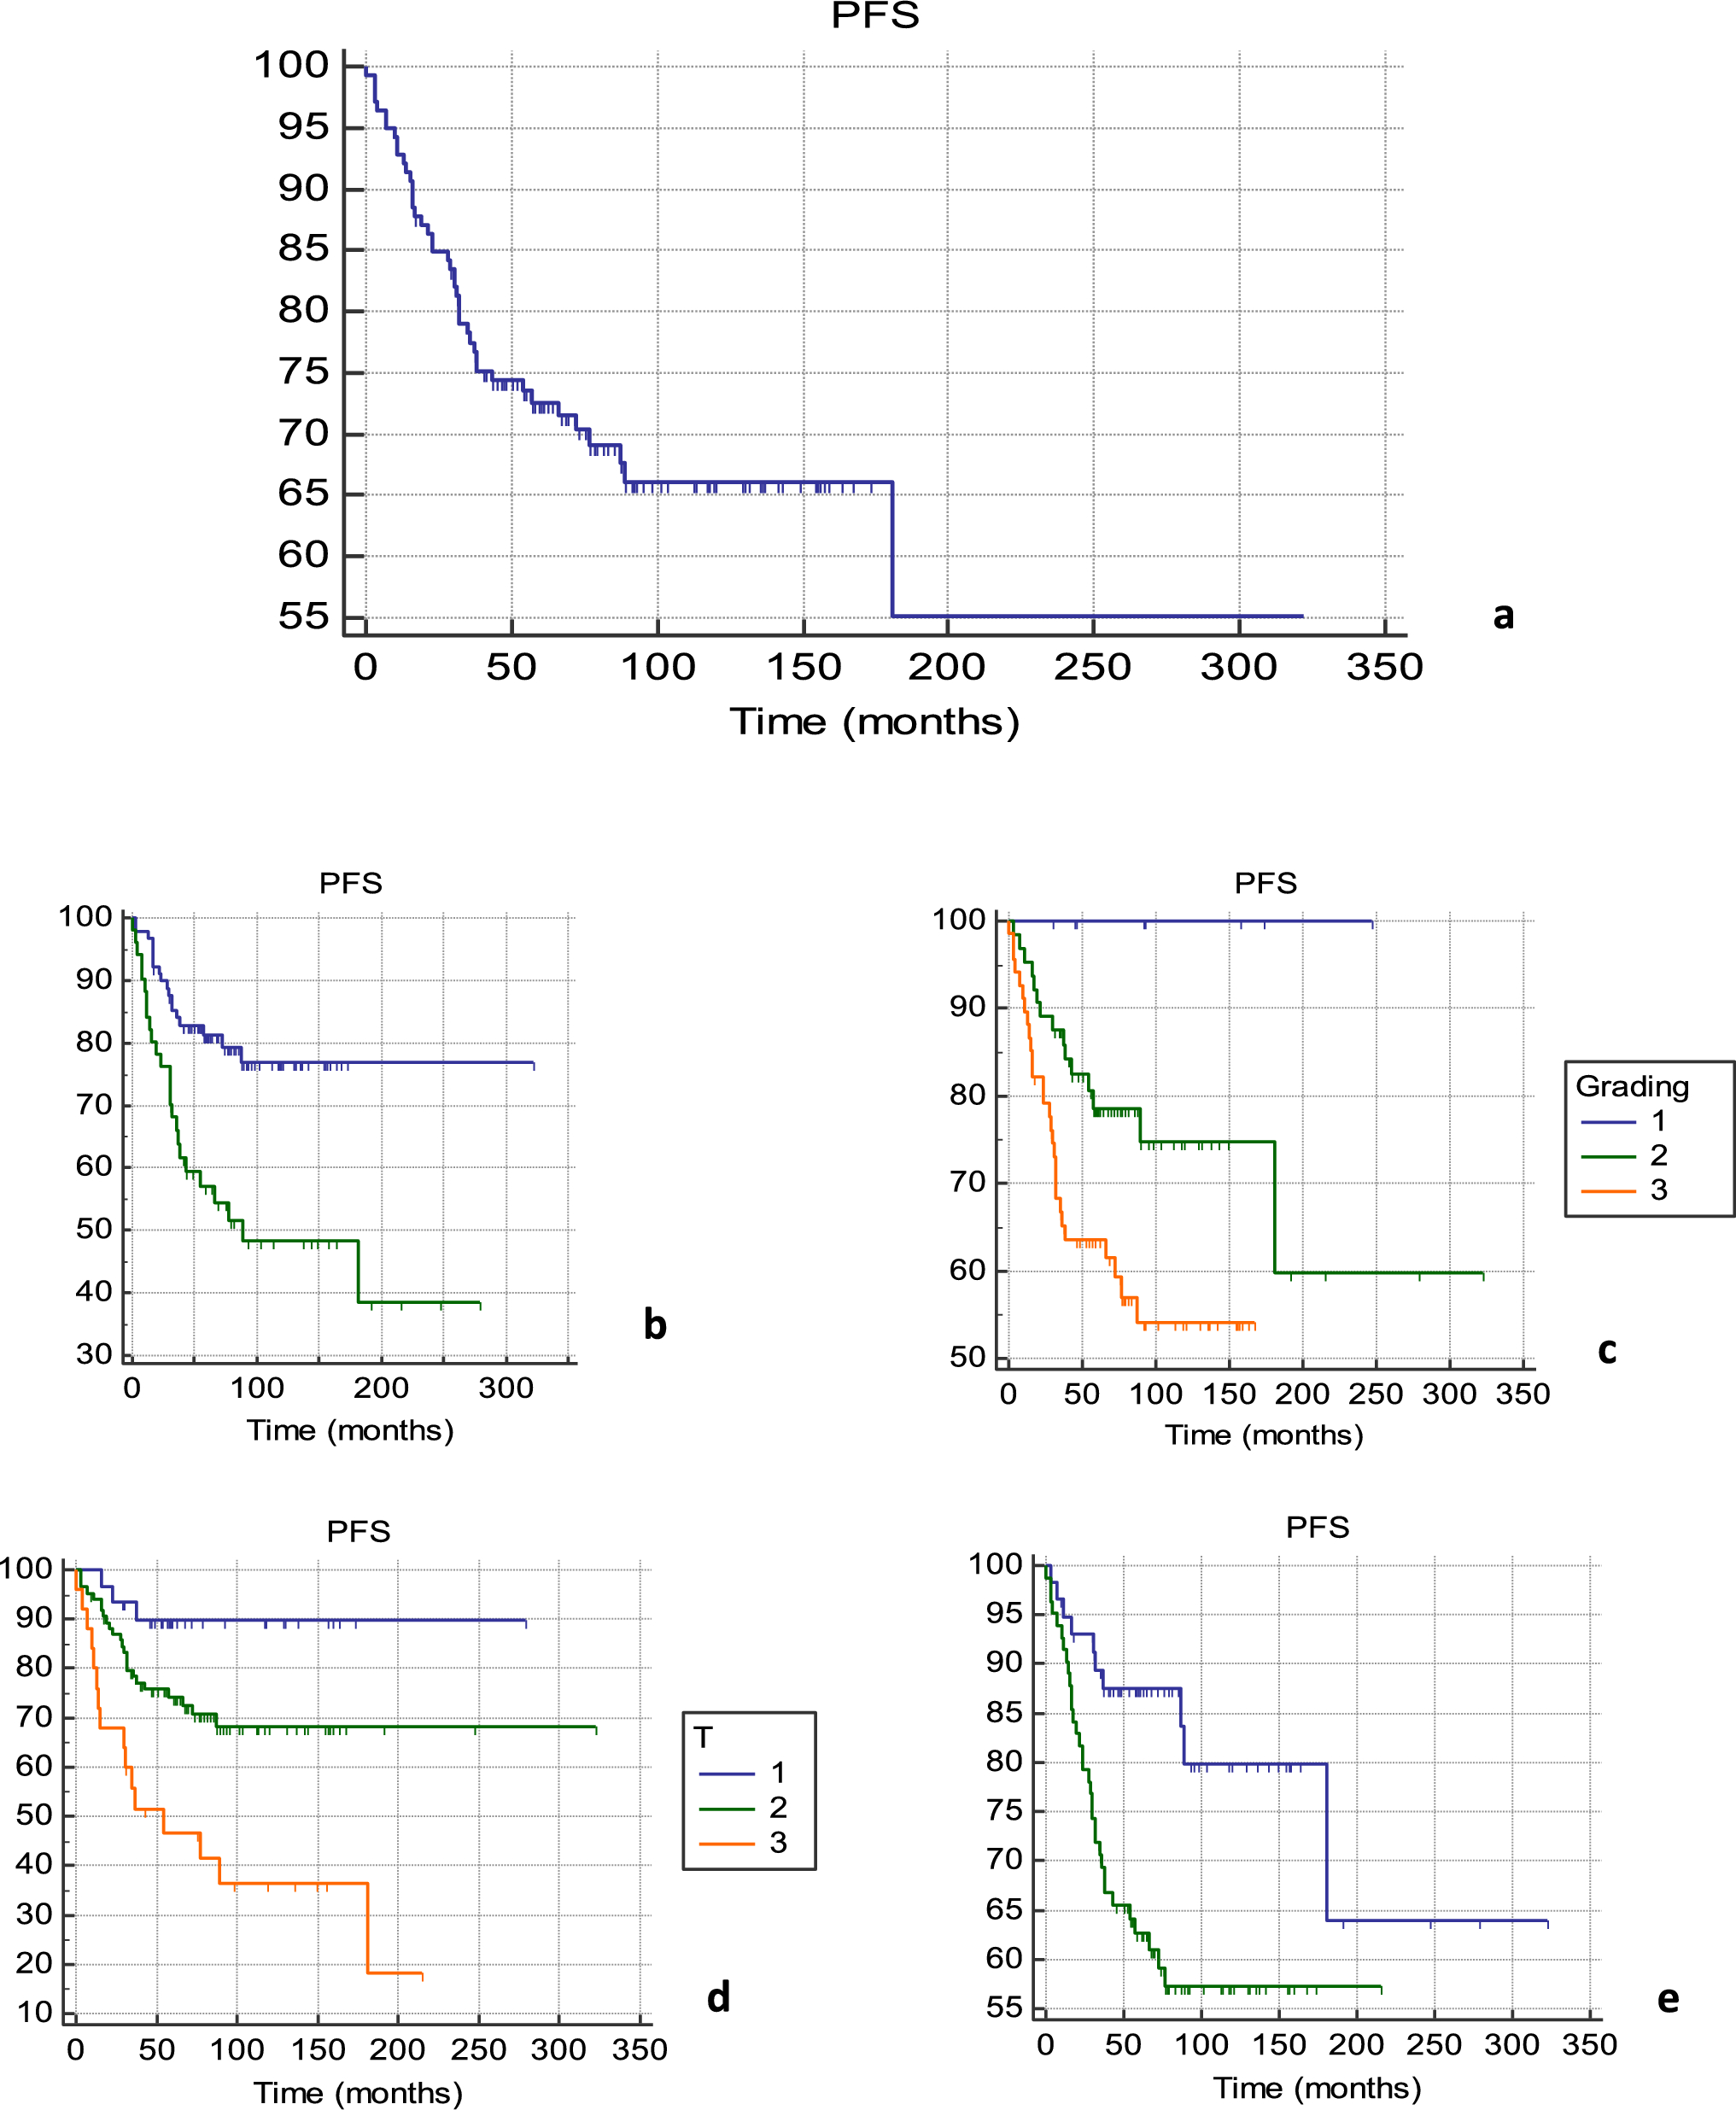 Anatomical assessment of local recurrence site in breast cancer patients after breast reconstruction and post-mastectomy radiotherapy: implications for radiation volumes and techniques